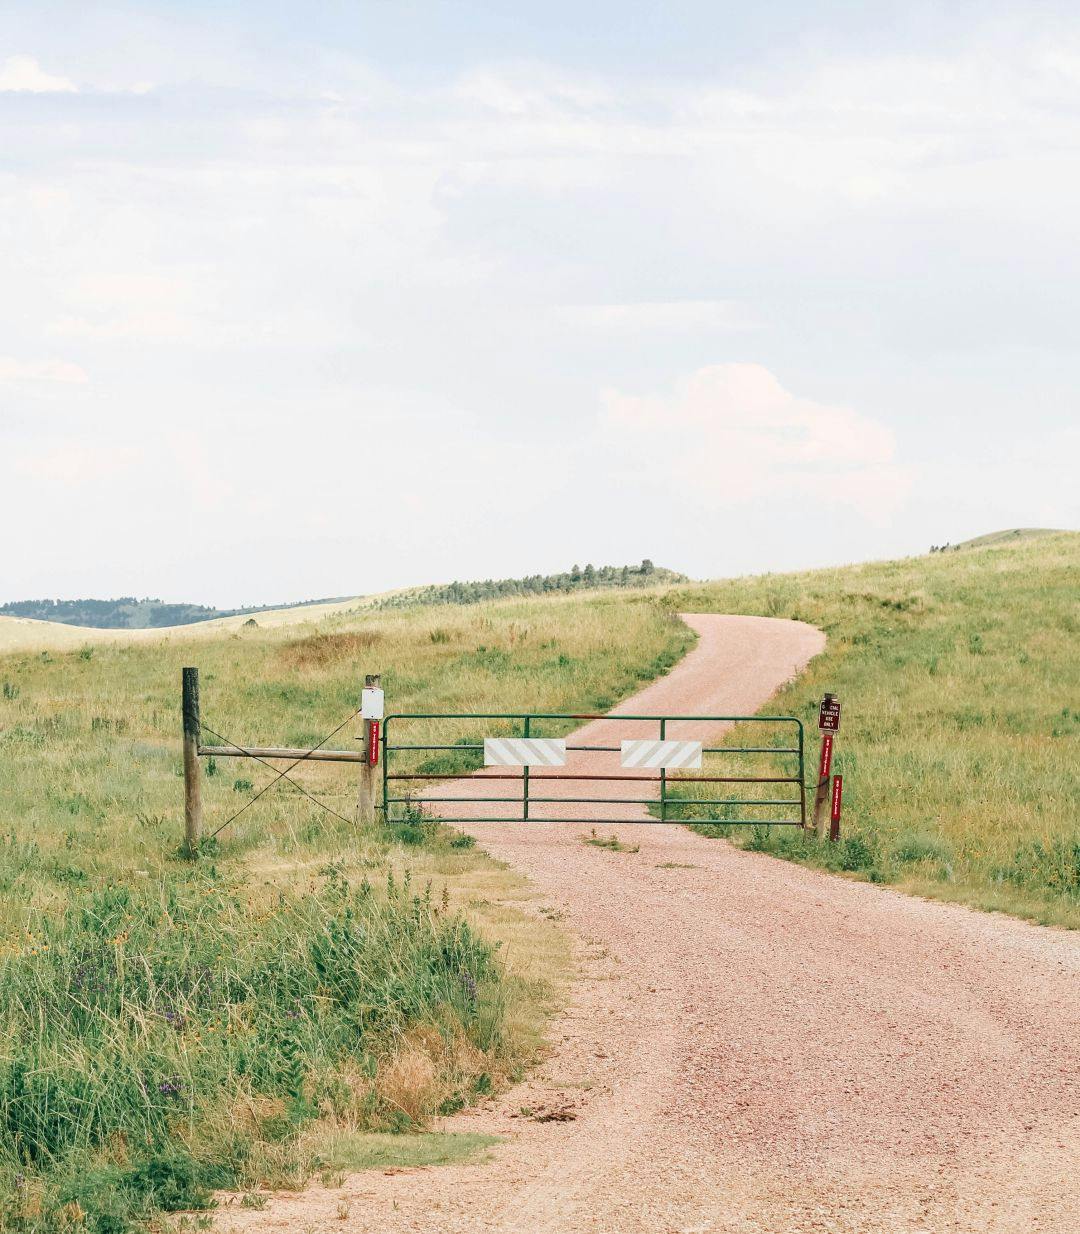 A gate on a dirt road in Fargo